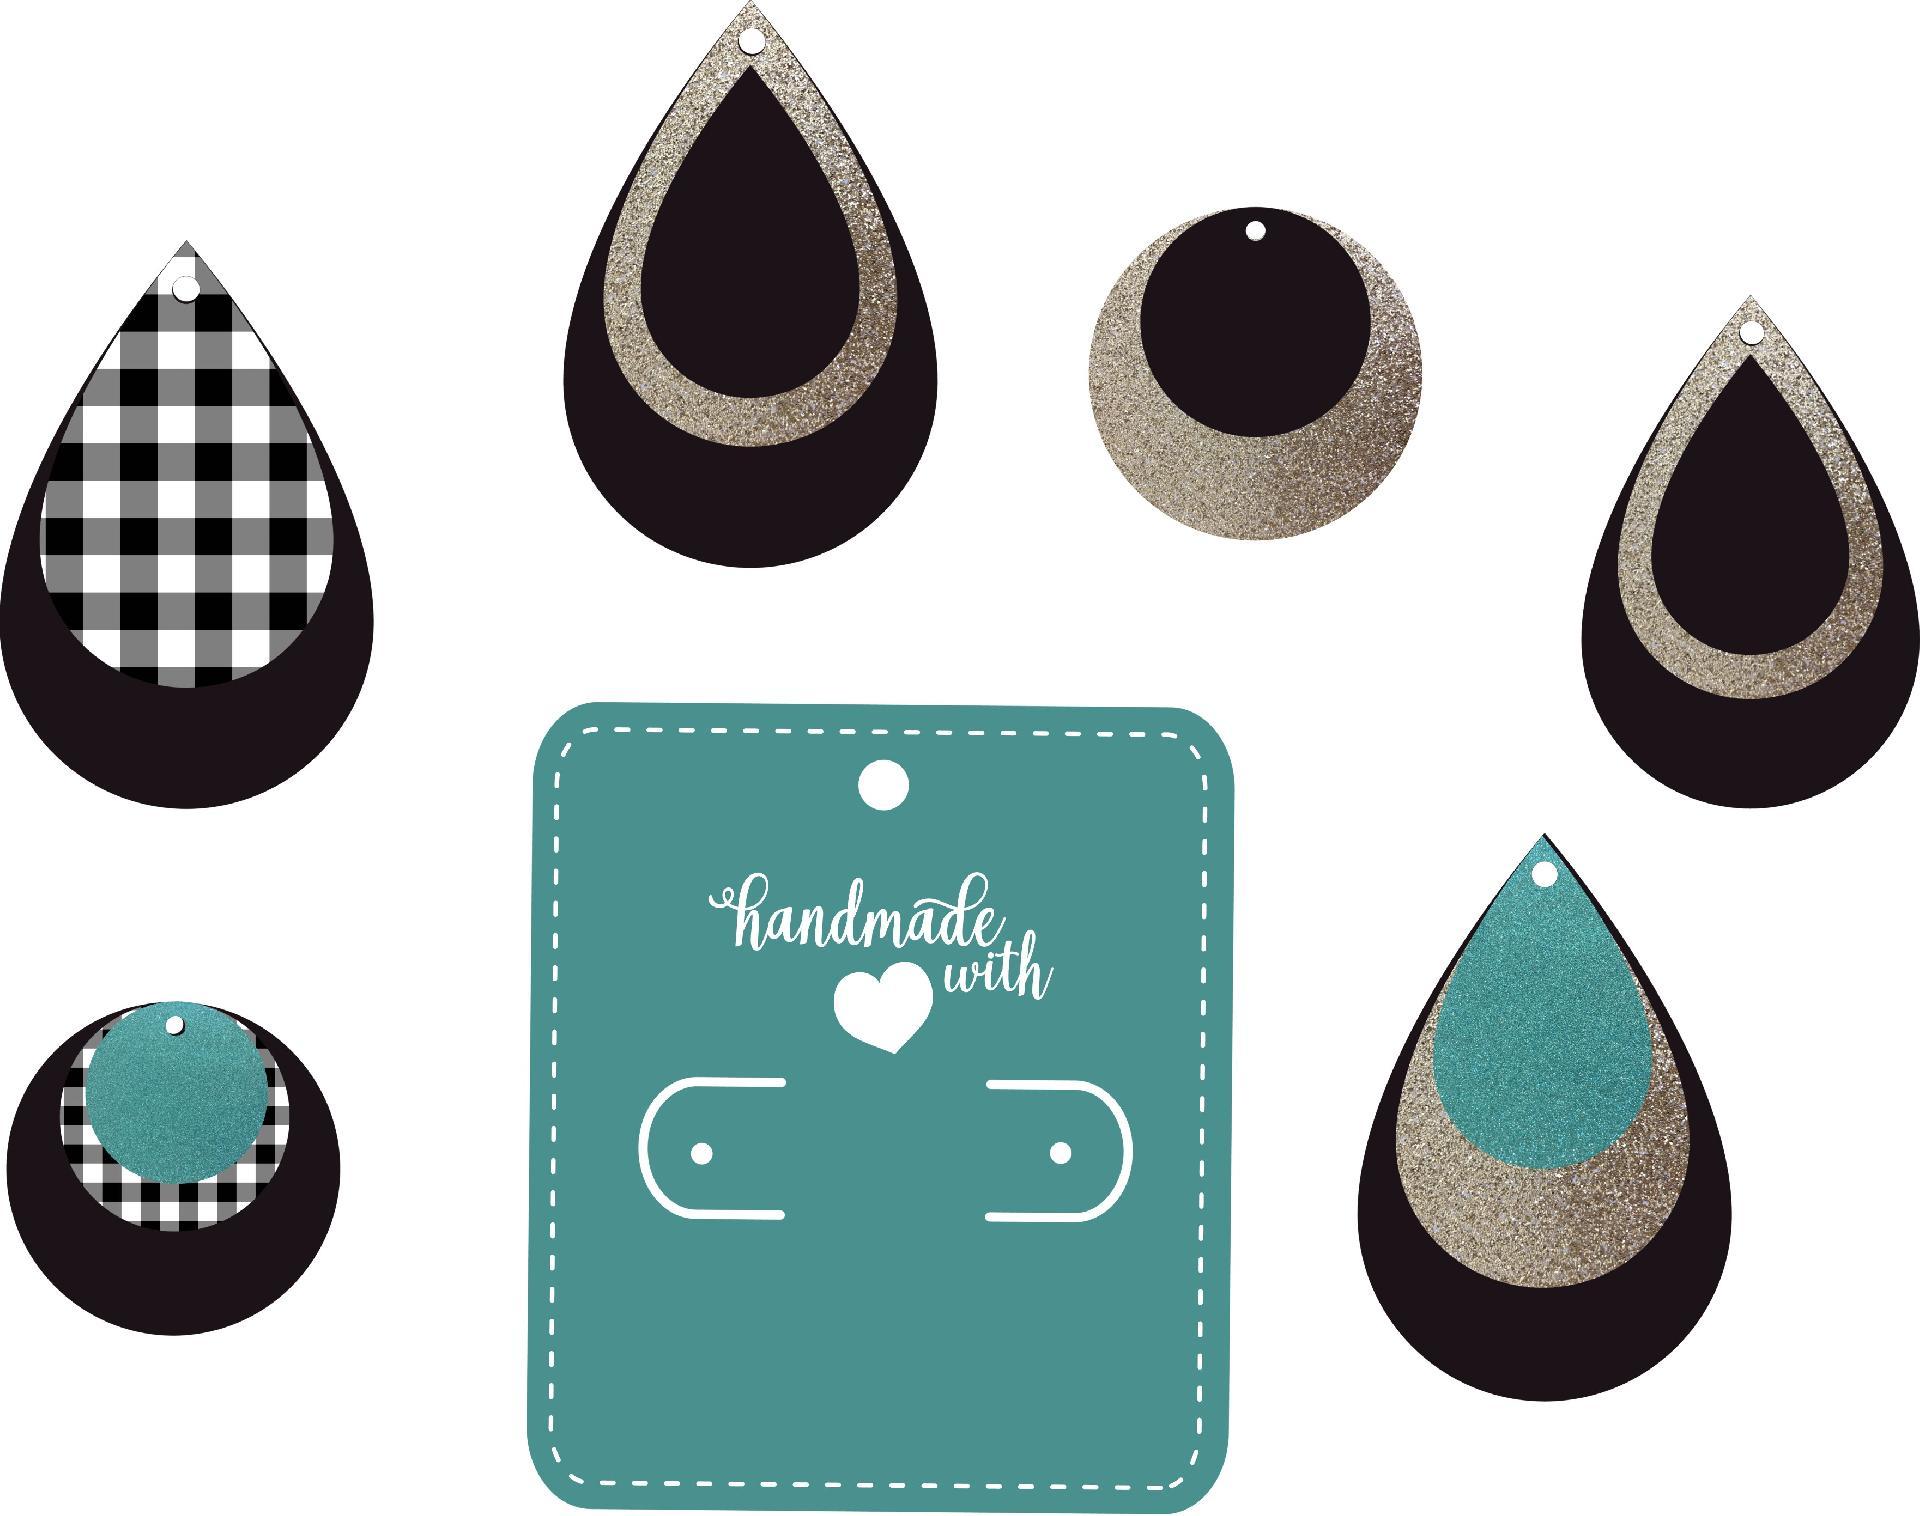 Earring Display Cards SVG - So Fontsy